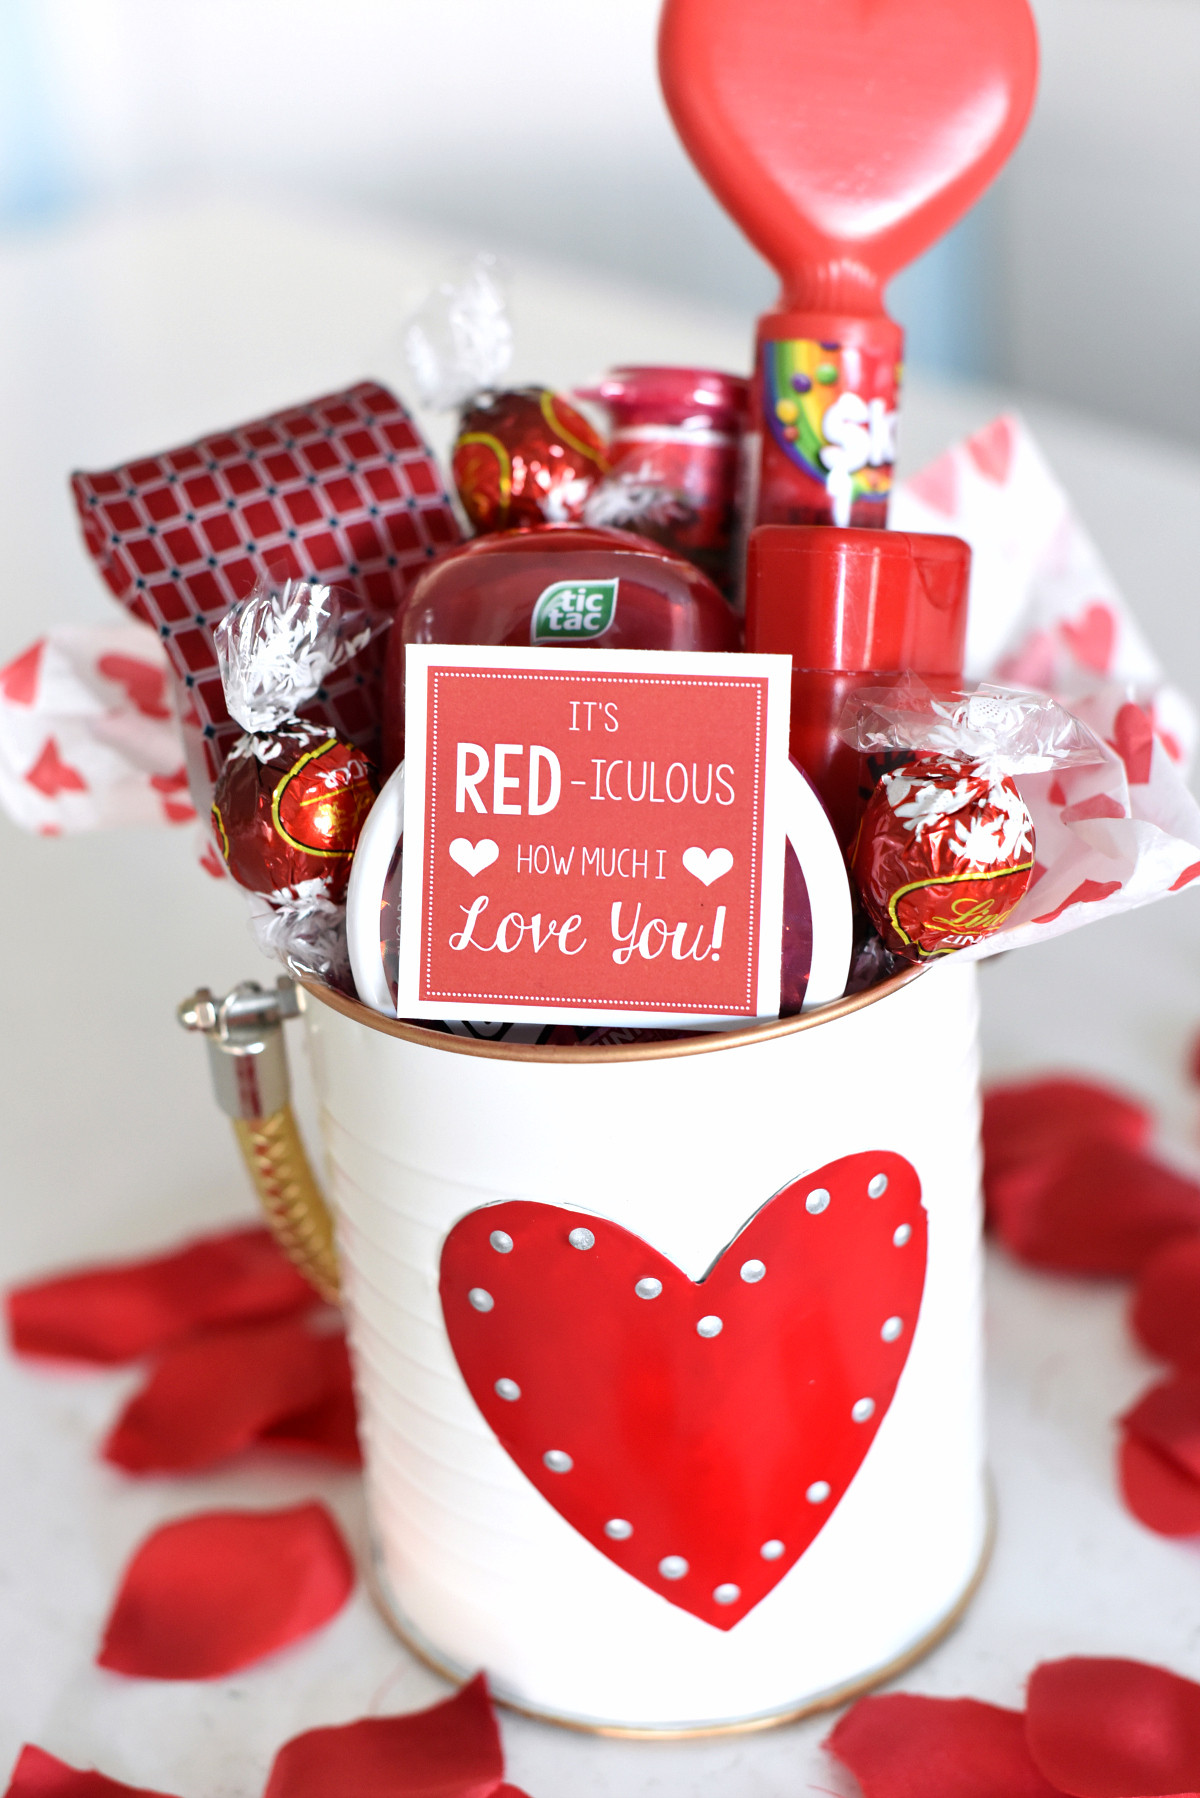 Valentines Gift Ideas For My Husband
 Cute Valentine s Day Gift Idea RED iculous Basket